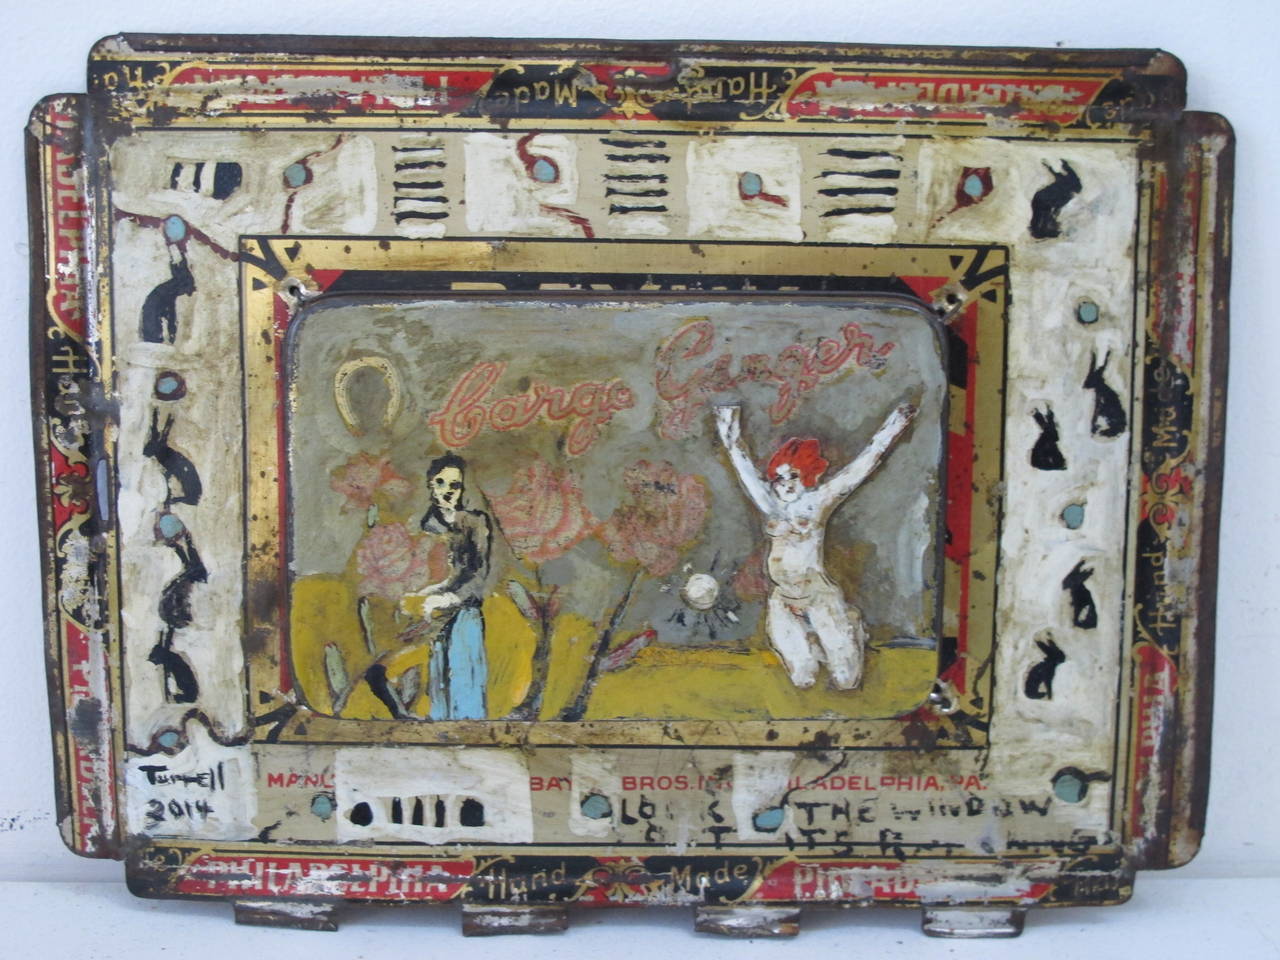 Terry Turrell has used a found tin top from a vintage cigar box as a surface to paint on with oil and enamel. The title is taken from the lithographed tin with has in script Cargo Ginger. This piece was dedicated to Terry's love Loni.